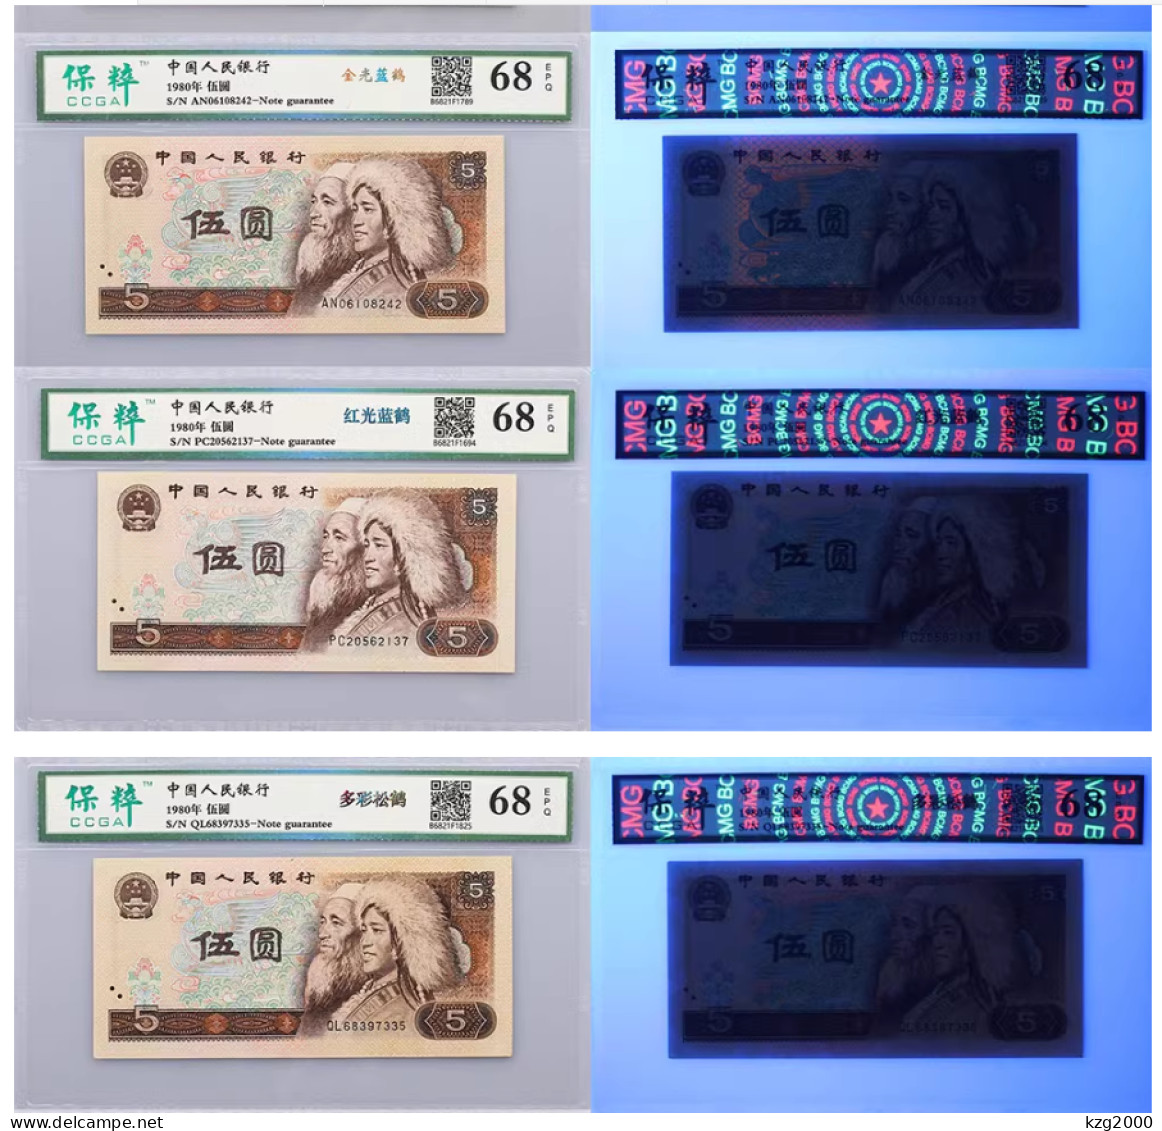 China Banknote 1980 The 4th set of RMB Paper Money Fluorescent version Full set of 27 sheets Banknotes 27Pcs